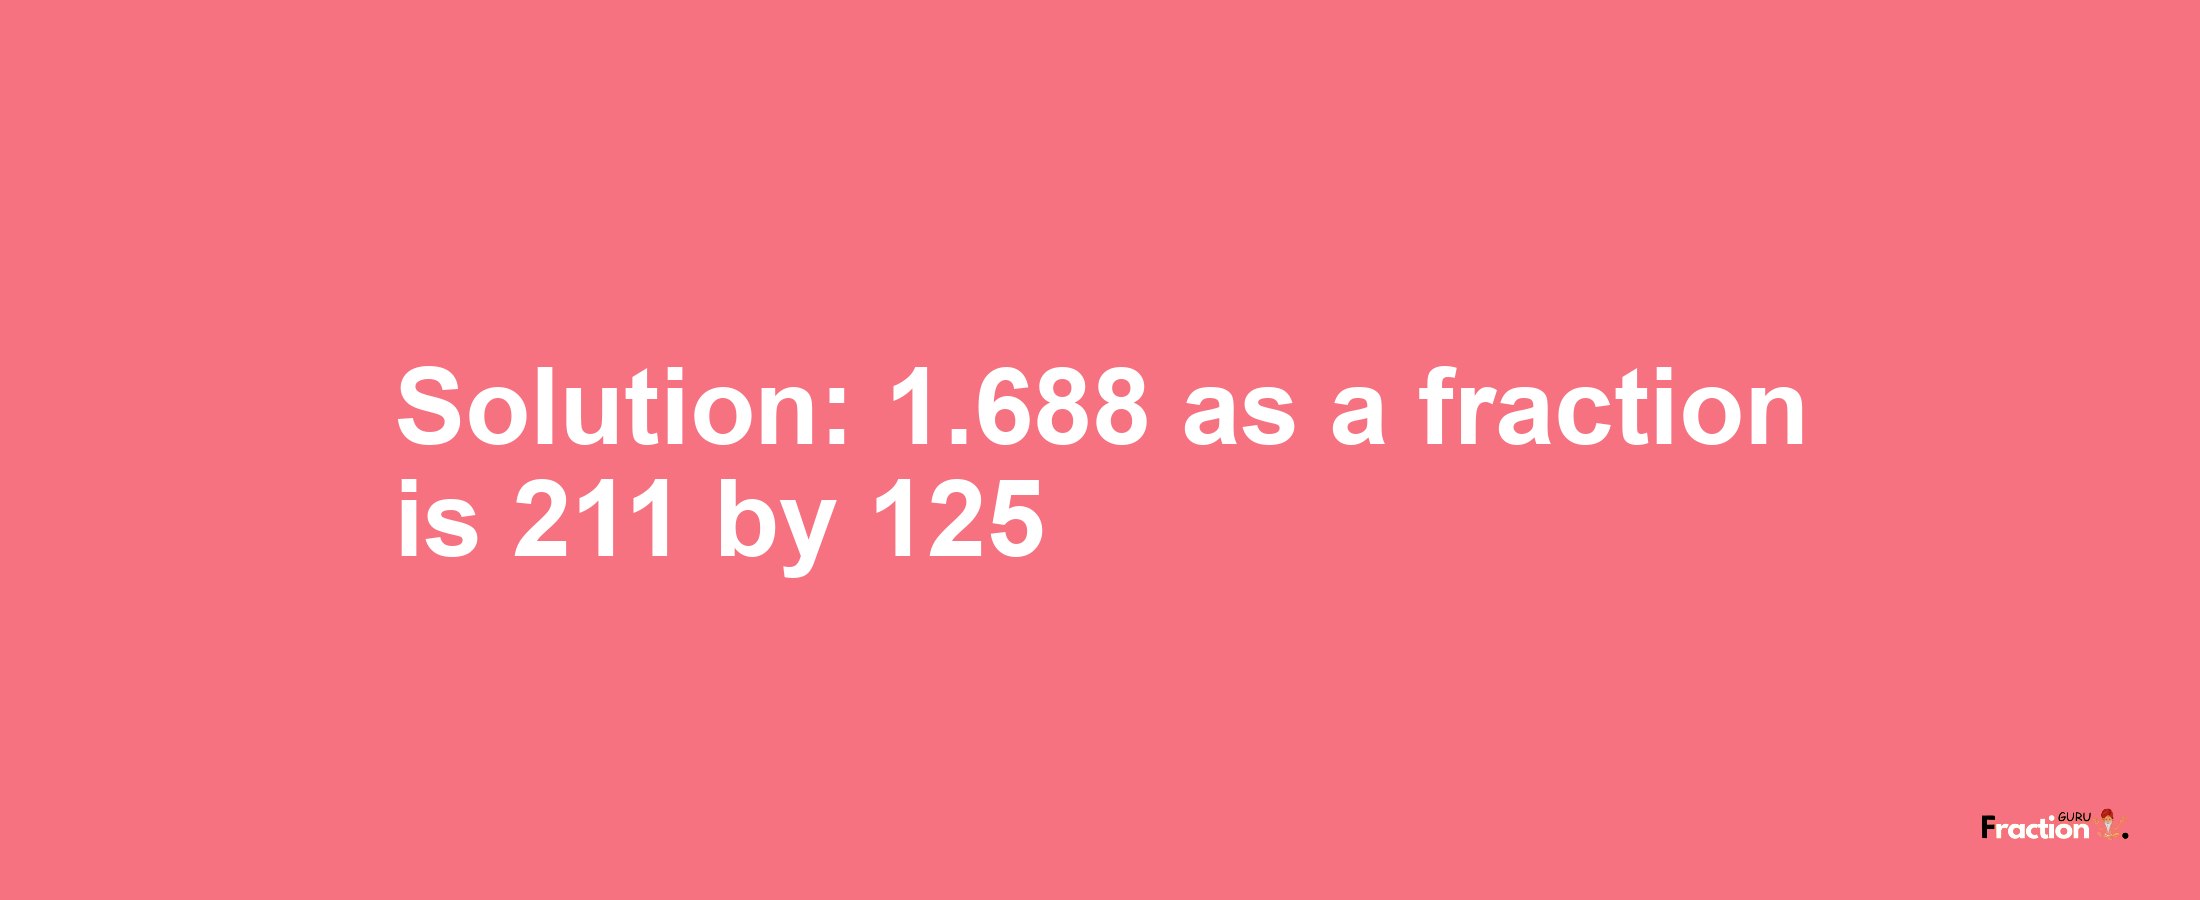 Solution:1.688 as a fraction is 211/125